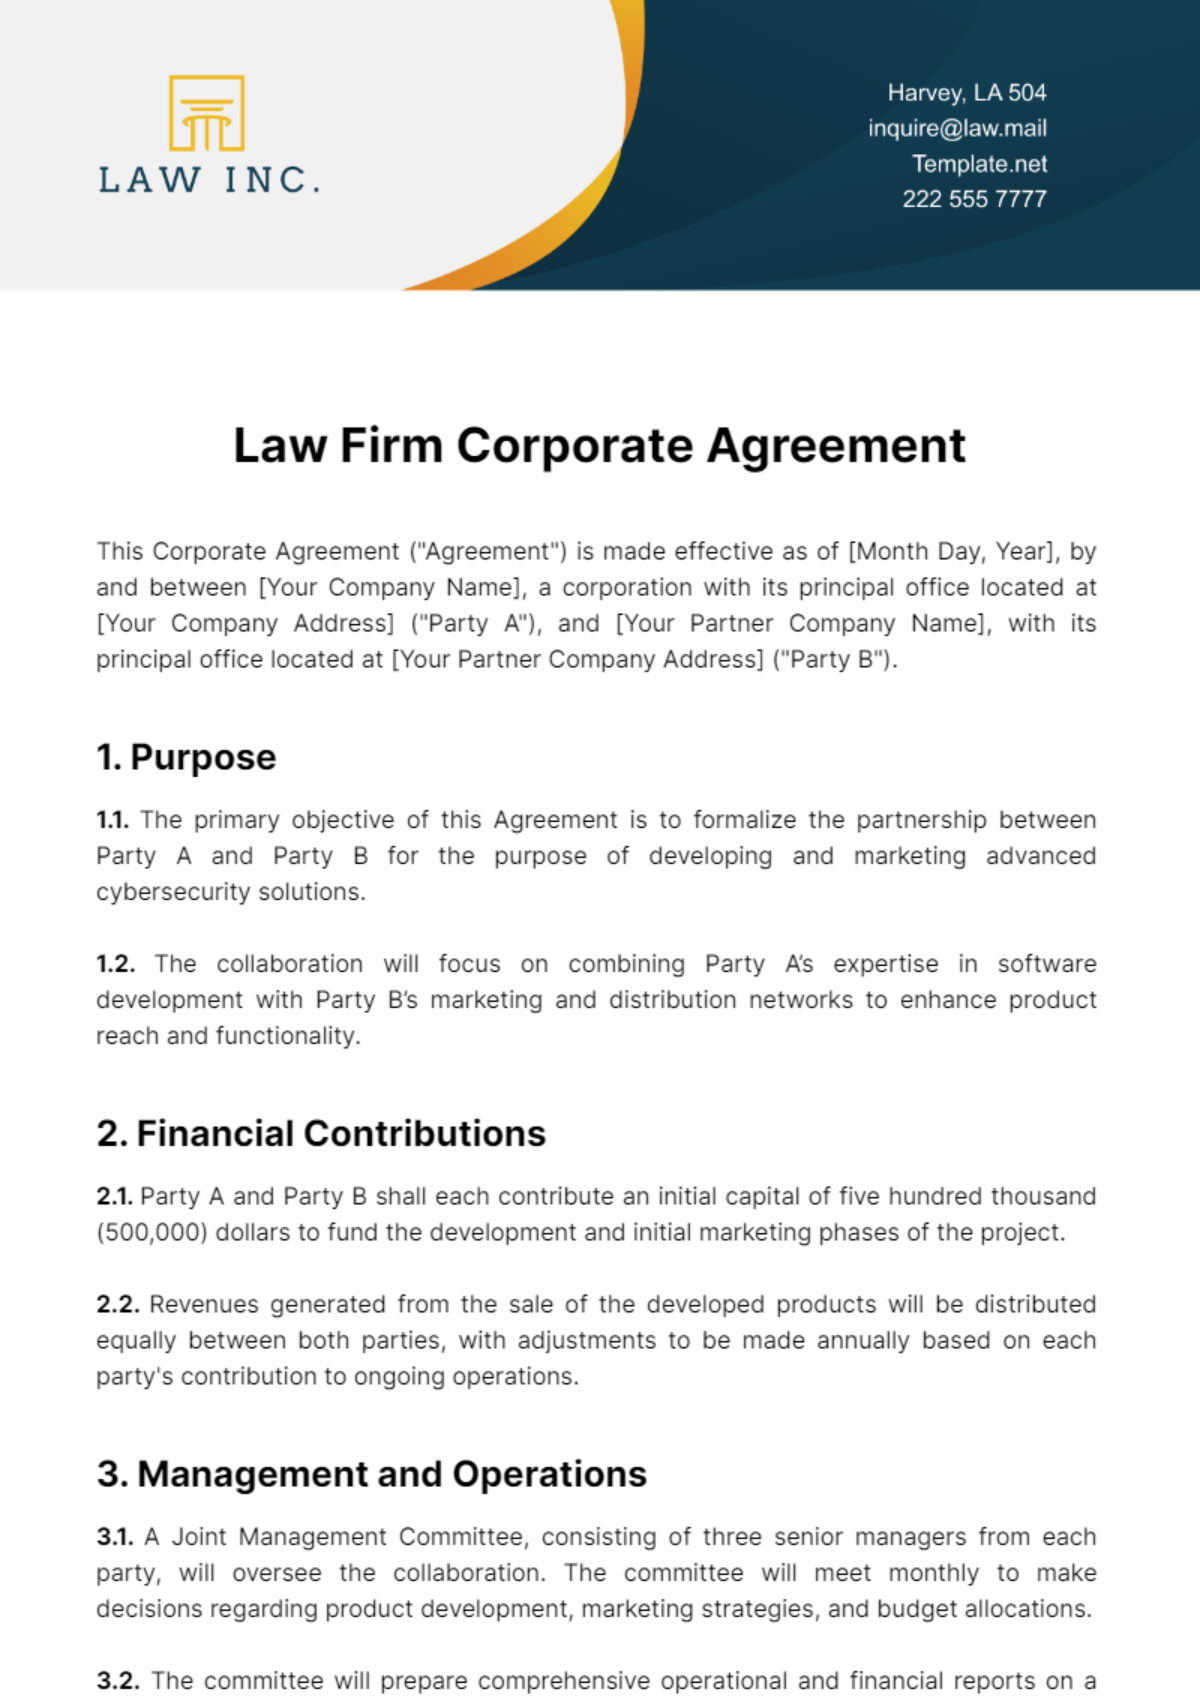 Law Firm Corporate Agreement Template